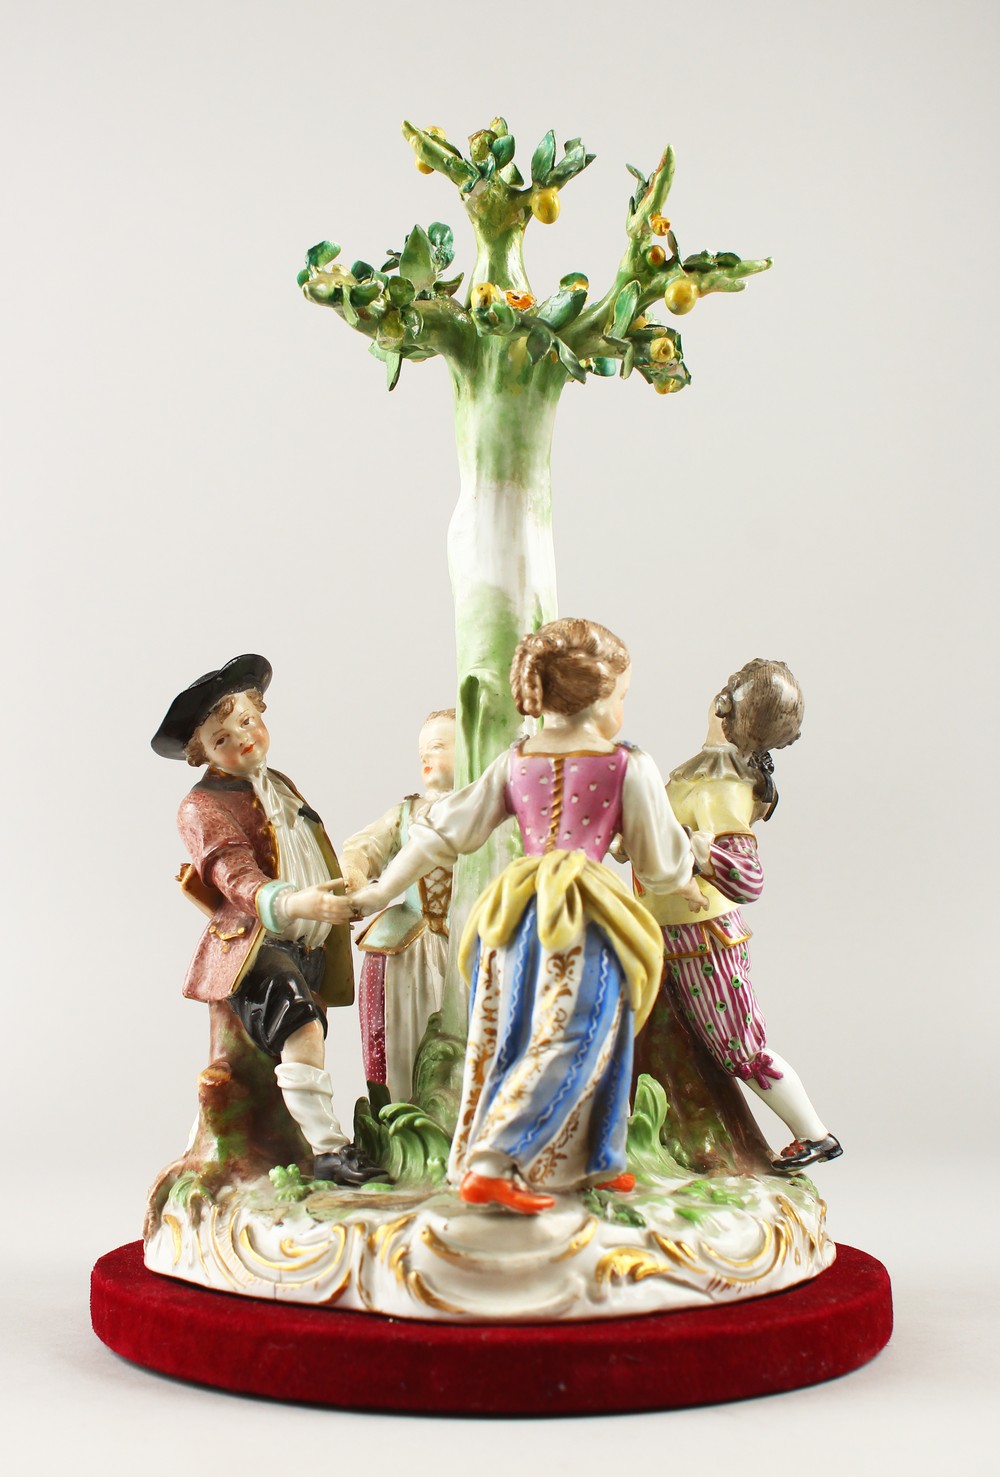 A 19TH CENTURY MEISSEN PATTERN GROUP, "RING-A-RING O' ROSES", four young figures dancing around a